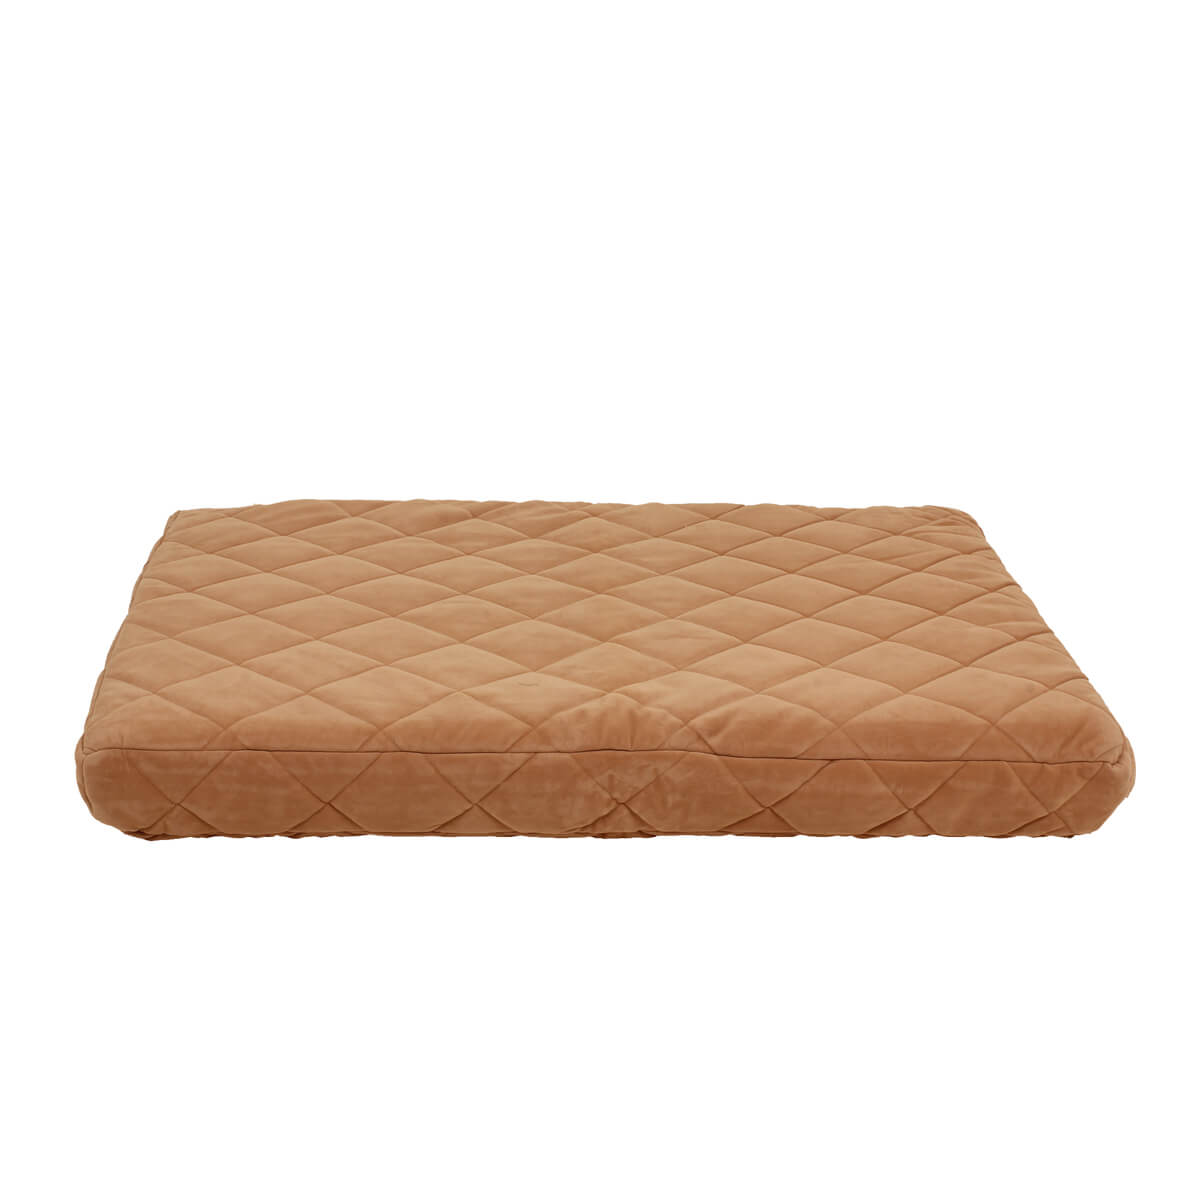 Orthopedic Foam Insert Bed - Ideal for Incontinent Pets